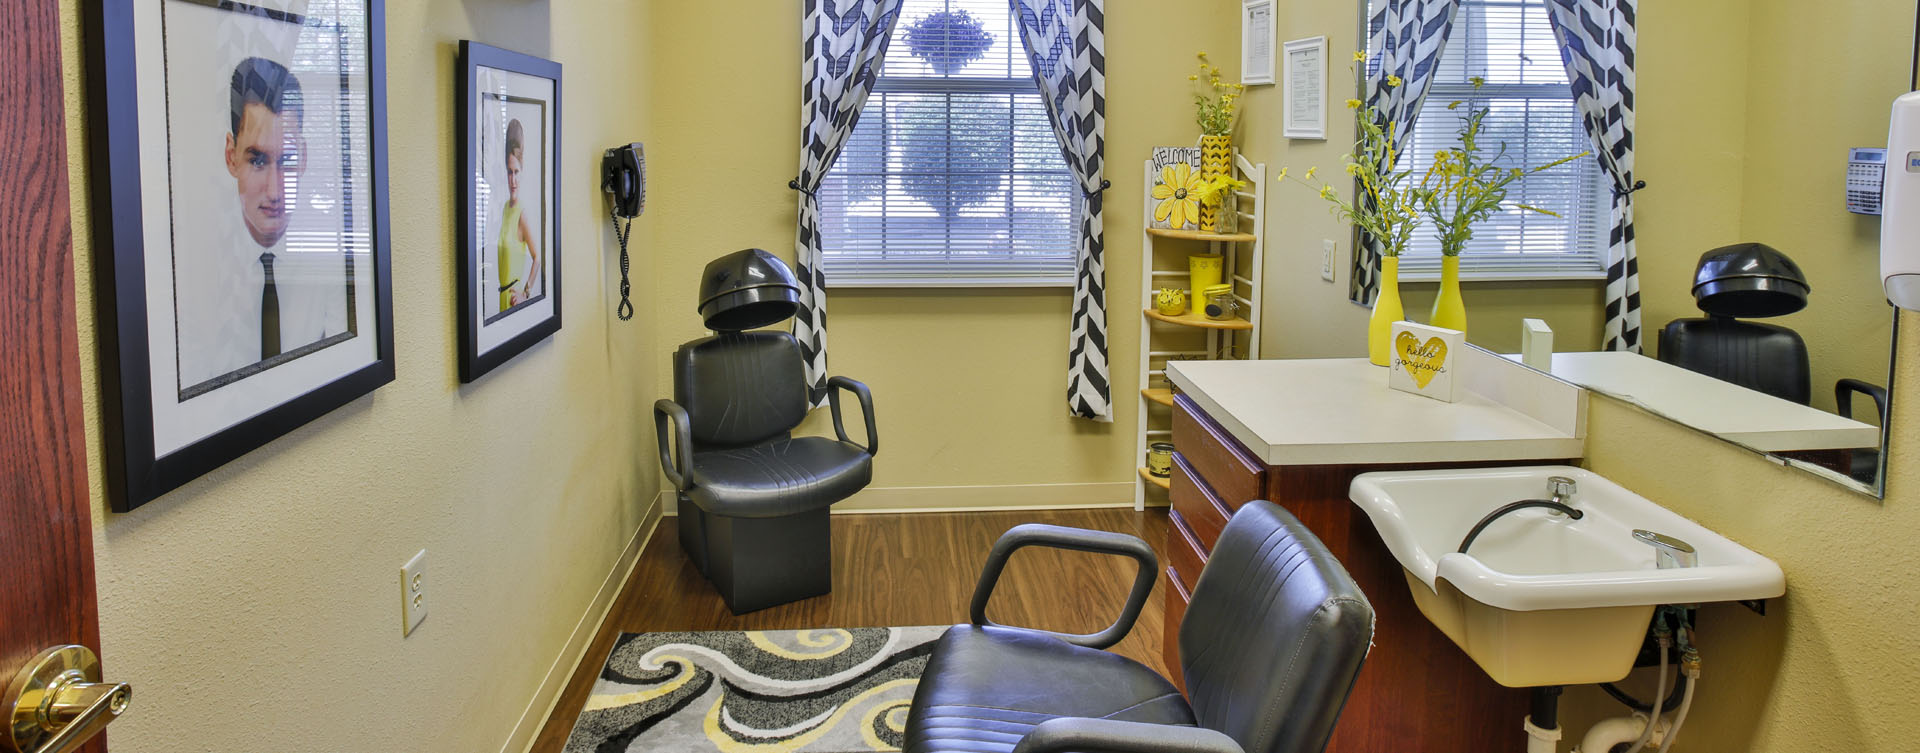 Strut on in and find out what the buzz is all about in the salon at Bickford of Lafayette